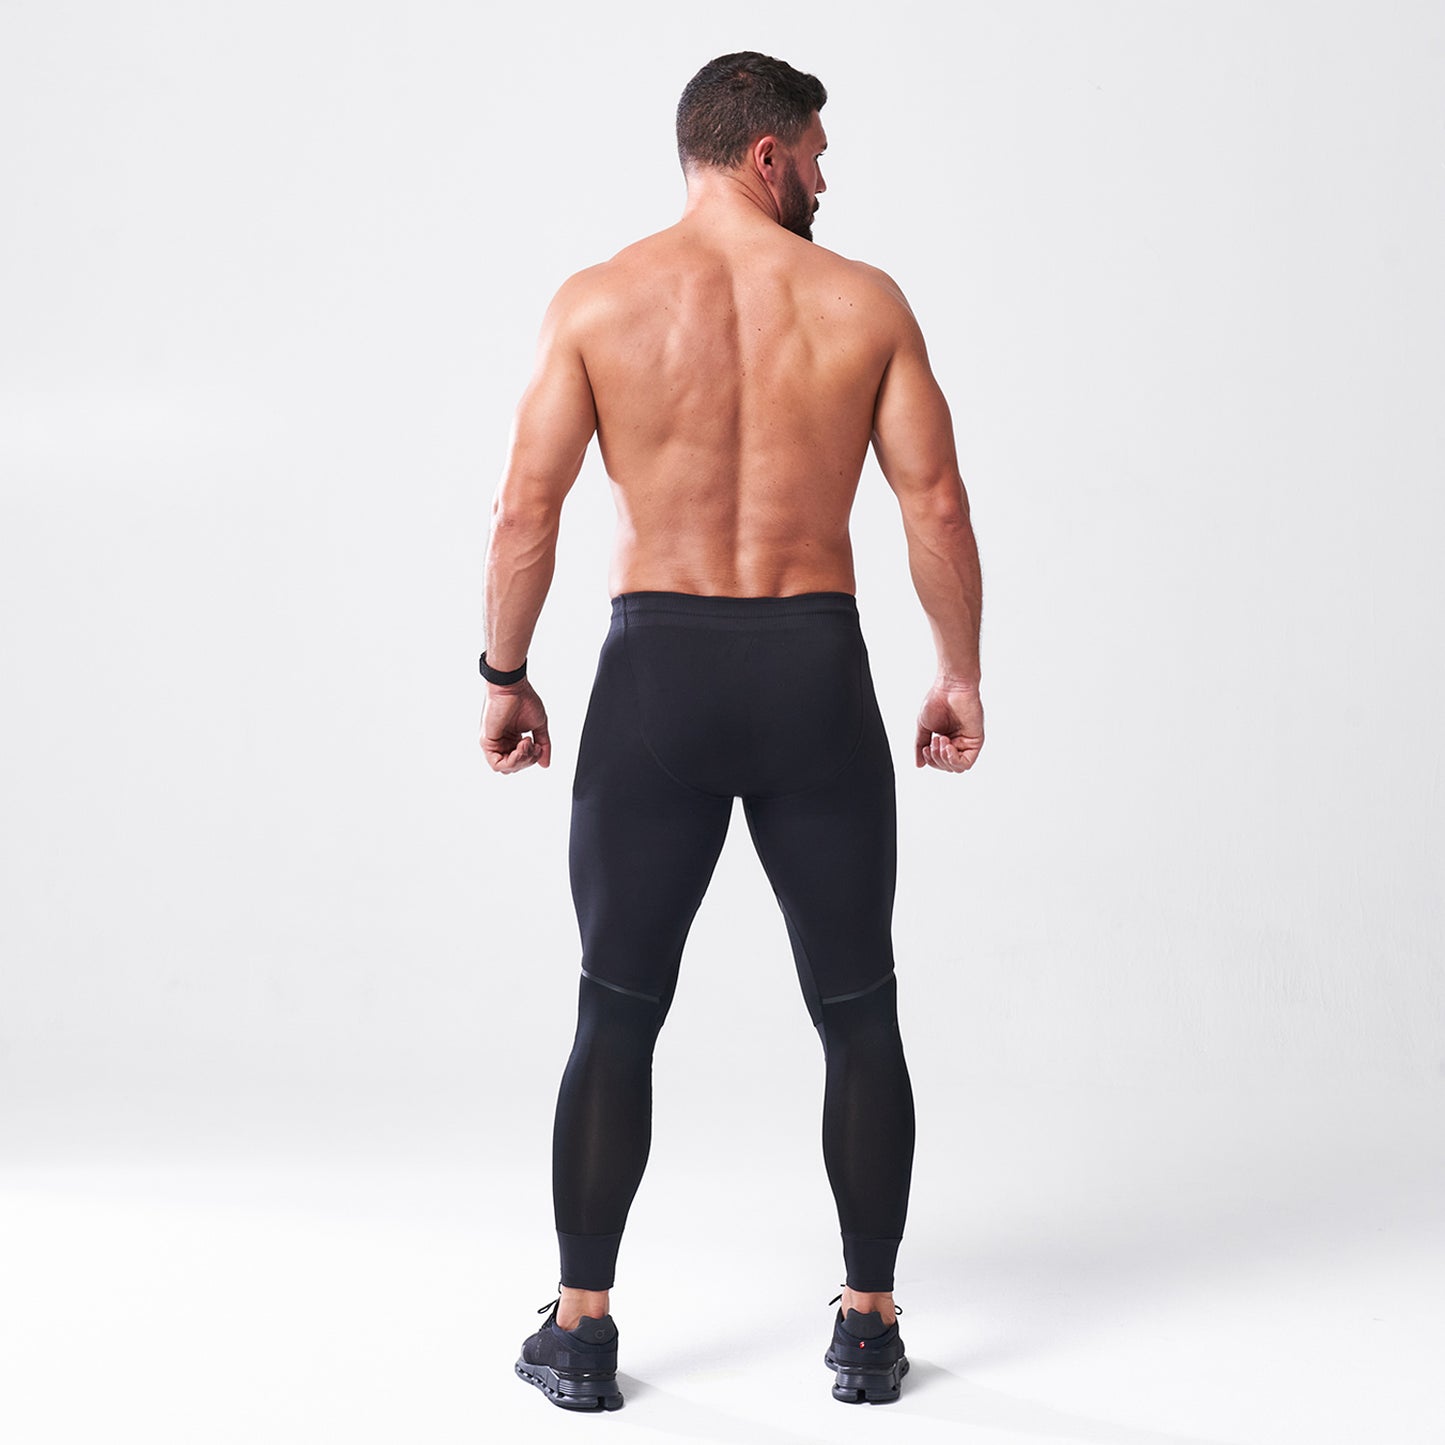 squatwolf-gym-wear-lab360-impact-tight-black-workout-tights-for-men